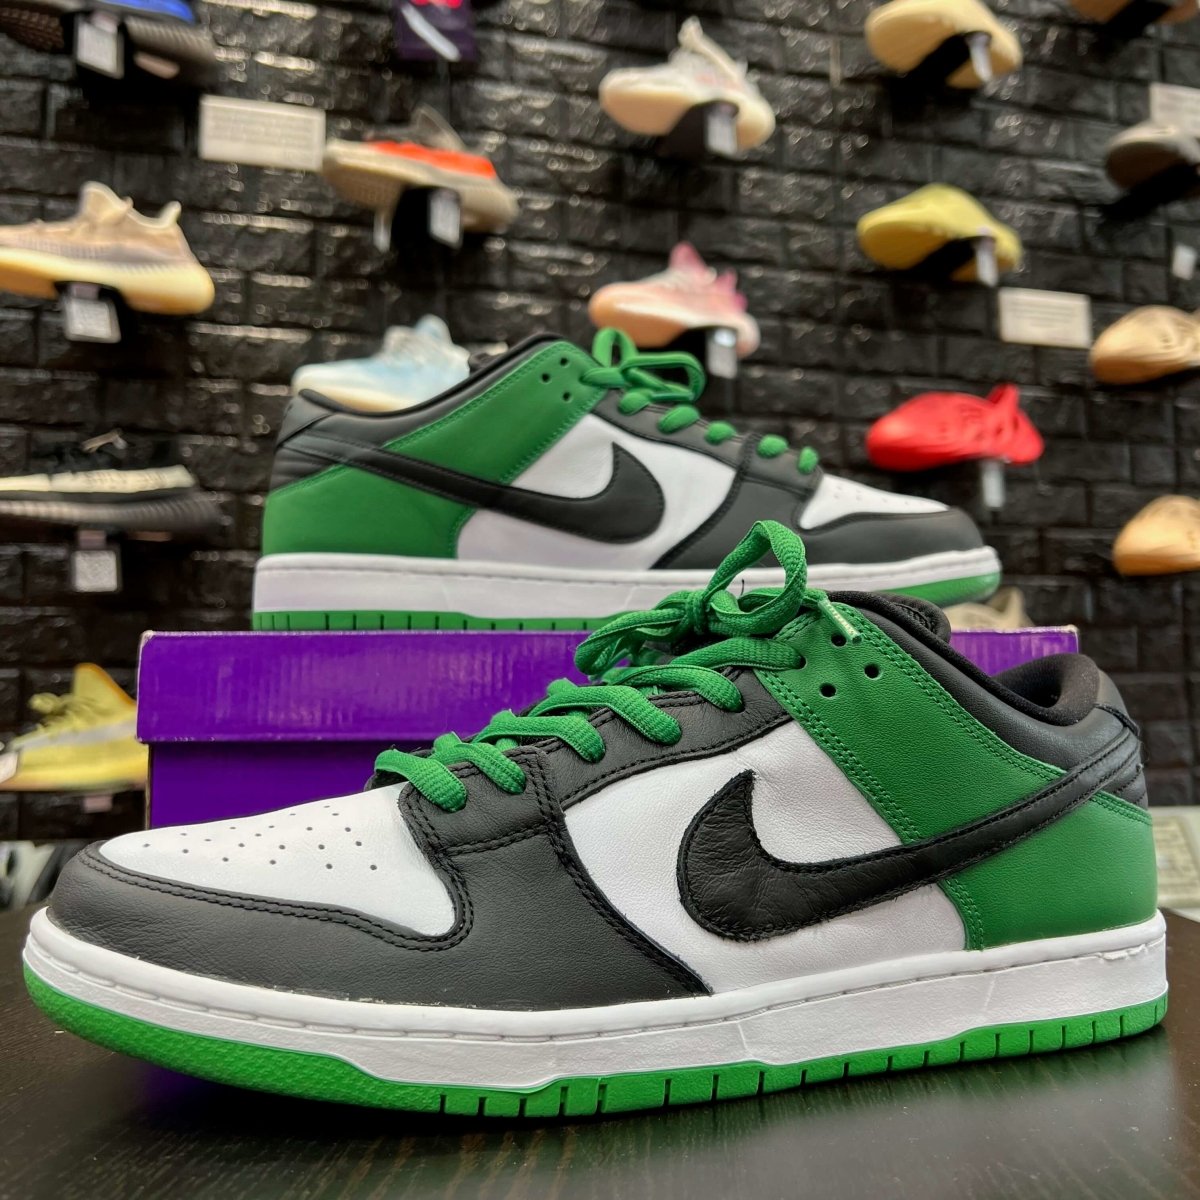 Dunk Low Pro SB 'Classic Green' - Gently Enjoyed (Used) Men 13 - Low Sneaker - Dunks - Jawns on Fire